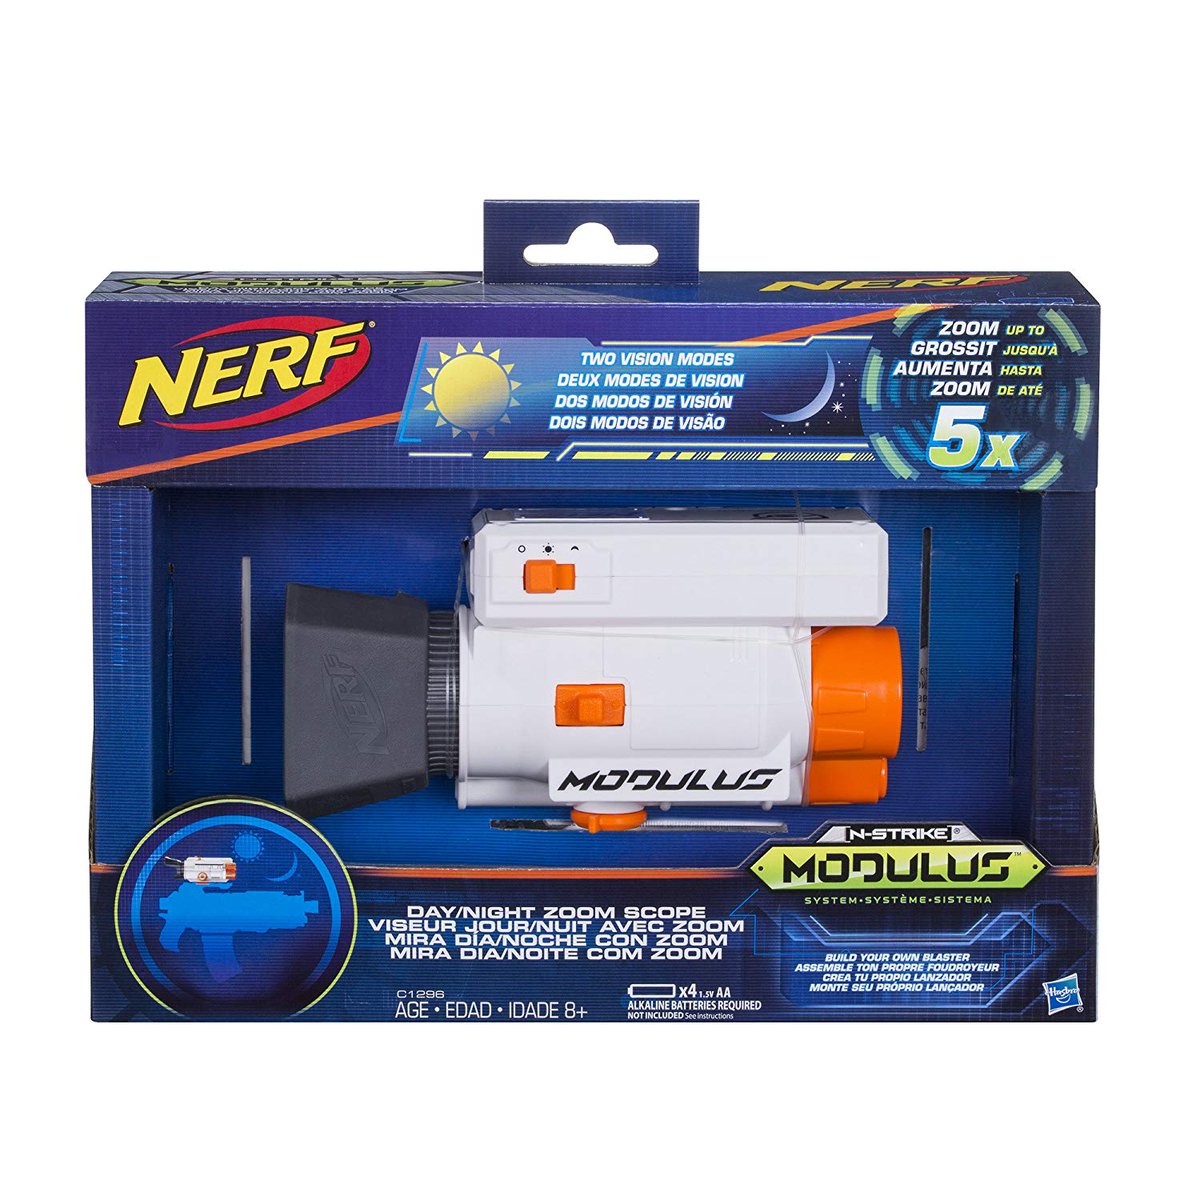 Nerf just got more tactical! Nerf Modulus Day/Night Zoom Scope amazon.com/gp/product/B01… Time for a light out Nerf war. #NightVision #TacticalAdvantage #SurvivalGames #tactics #OwnTheNight #NightCombat #milsim